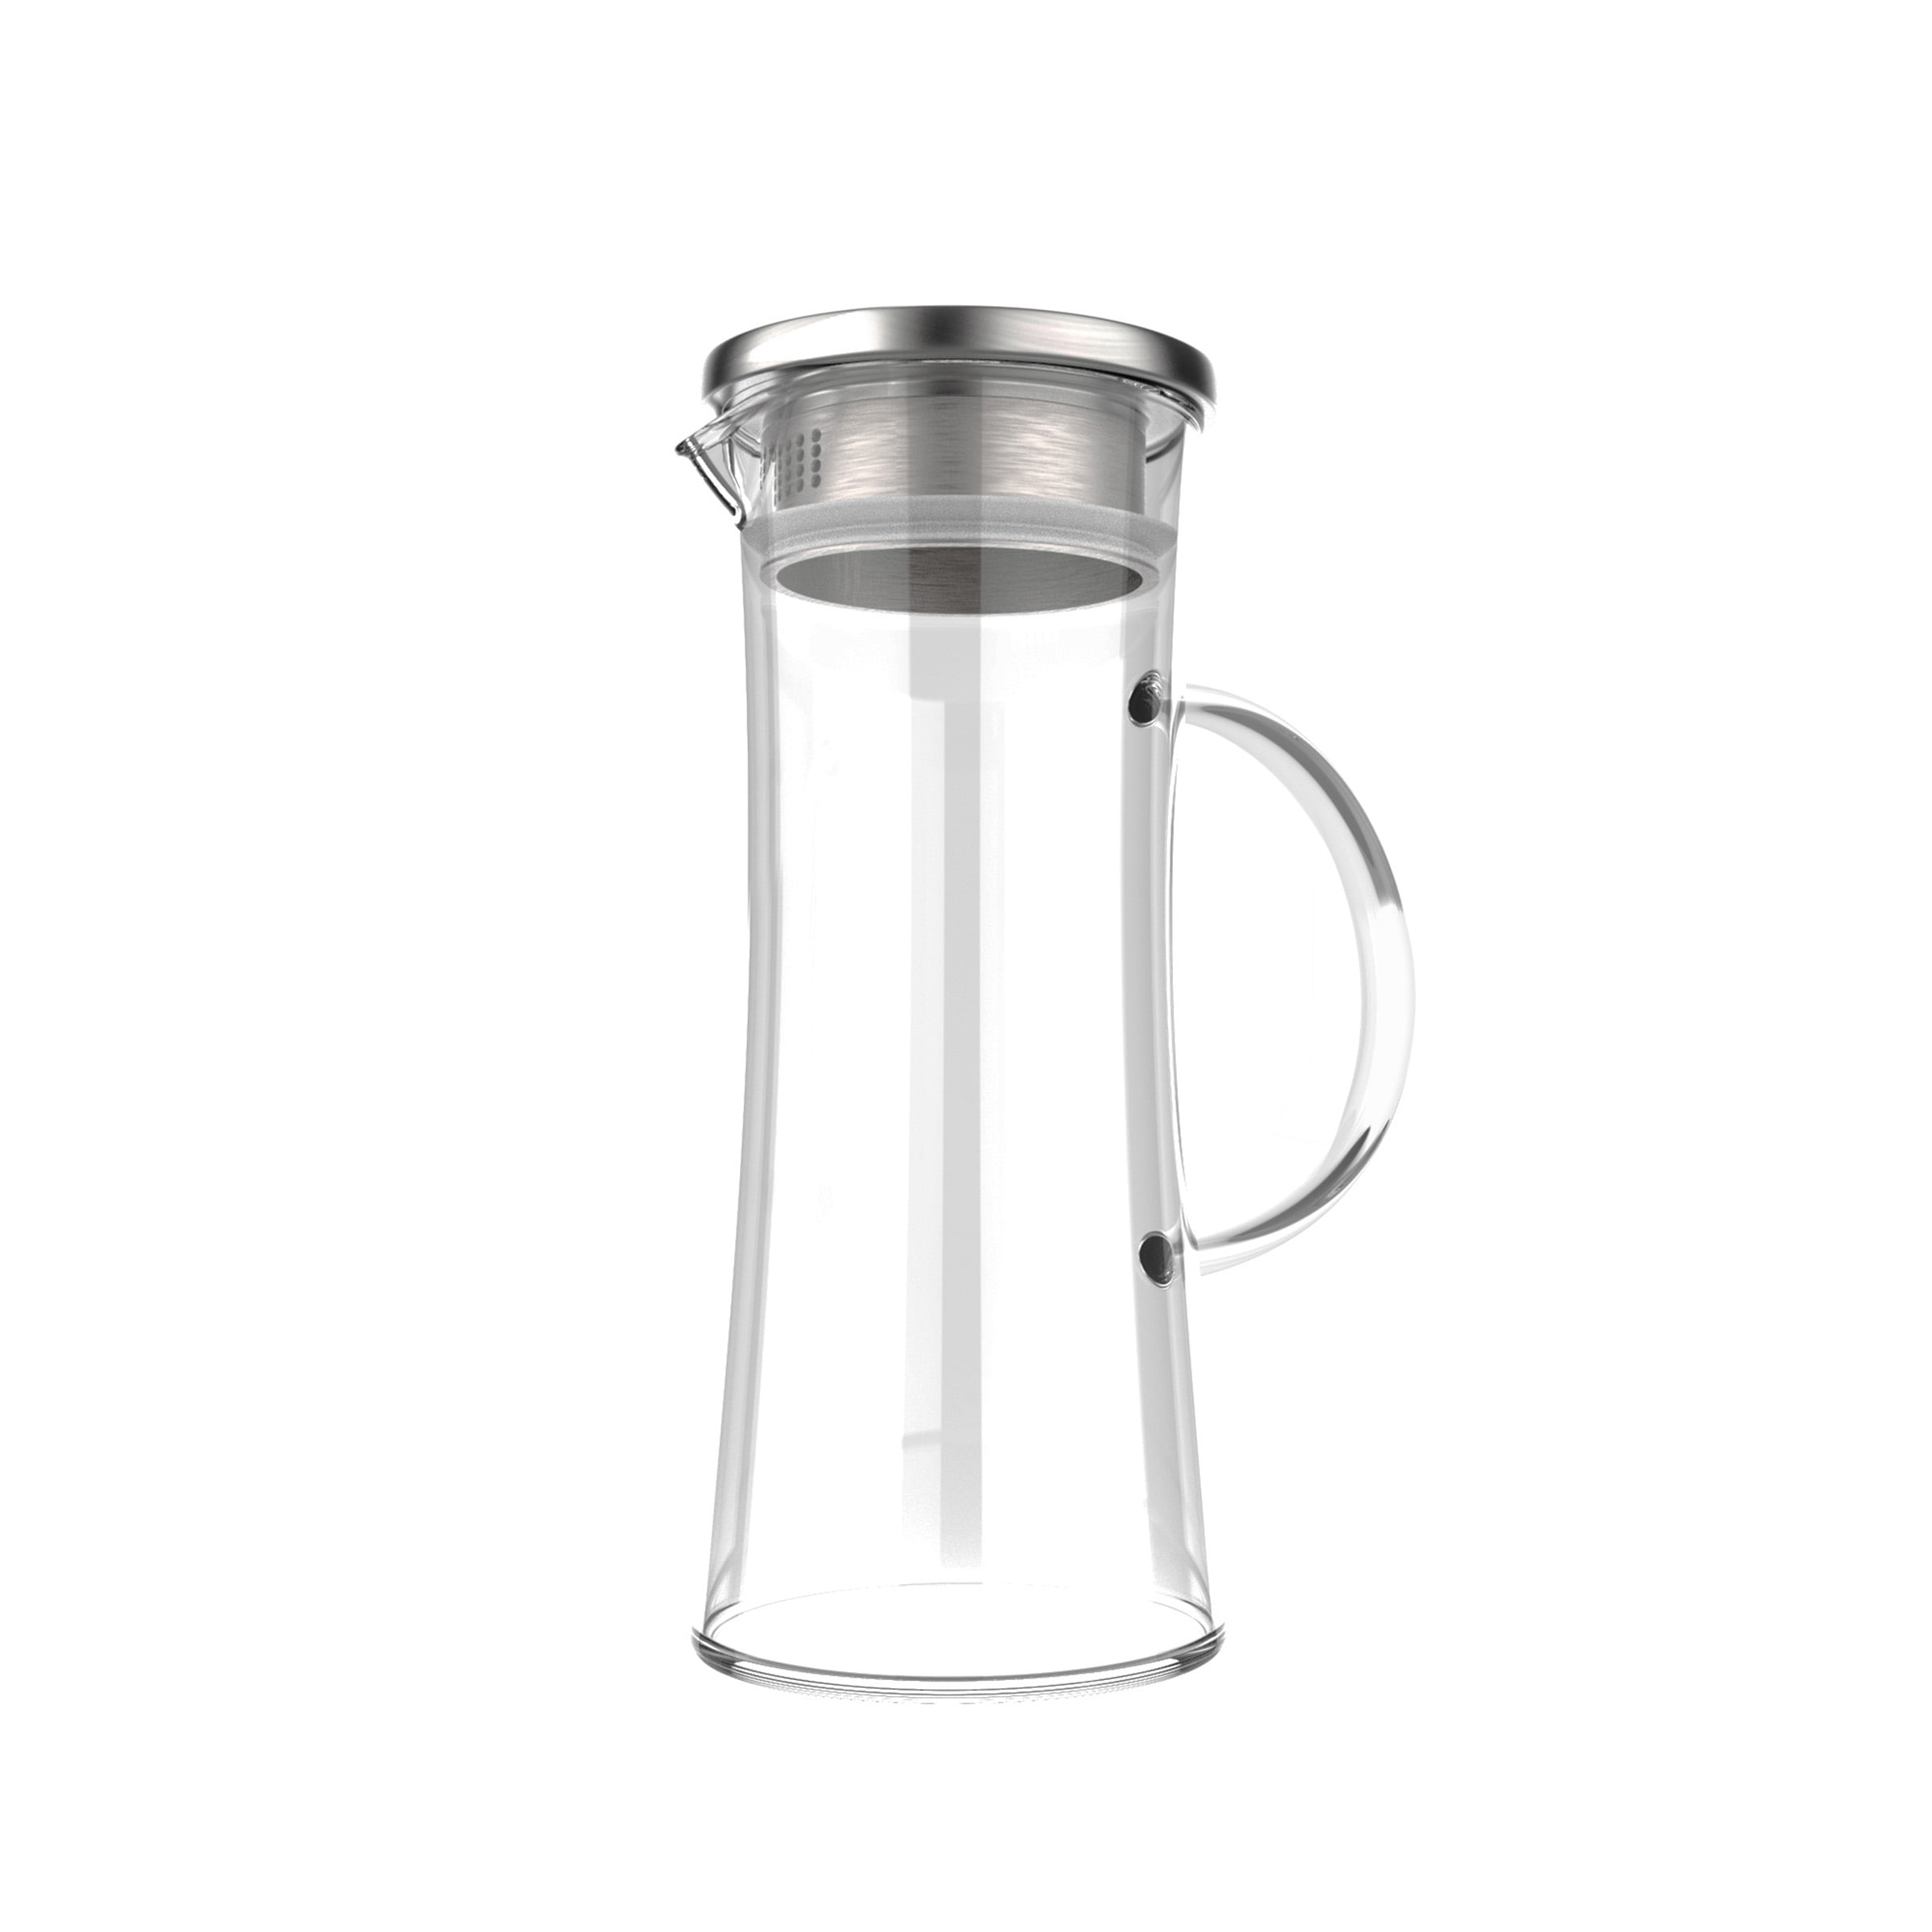  Glass Pitcher with Lid for Fridge, 46 oz Pumpkin Glass Pitcher  with Lid and Spout, Glass Carafe for Hot/Cold Water, Iced Tea Pitcher,  Large Pitcher for Coffee Juice Homemade Beverage, Brown 